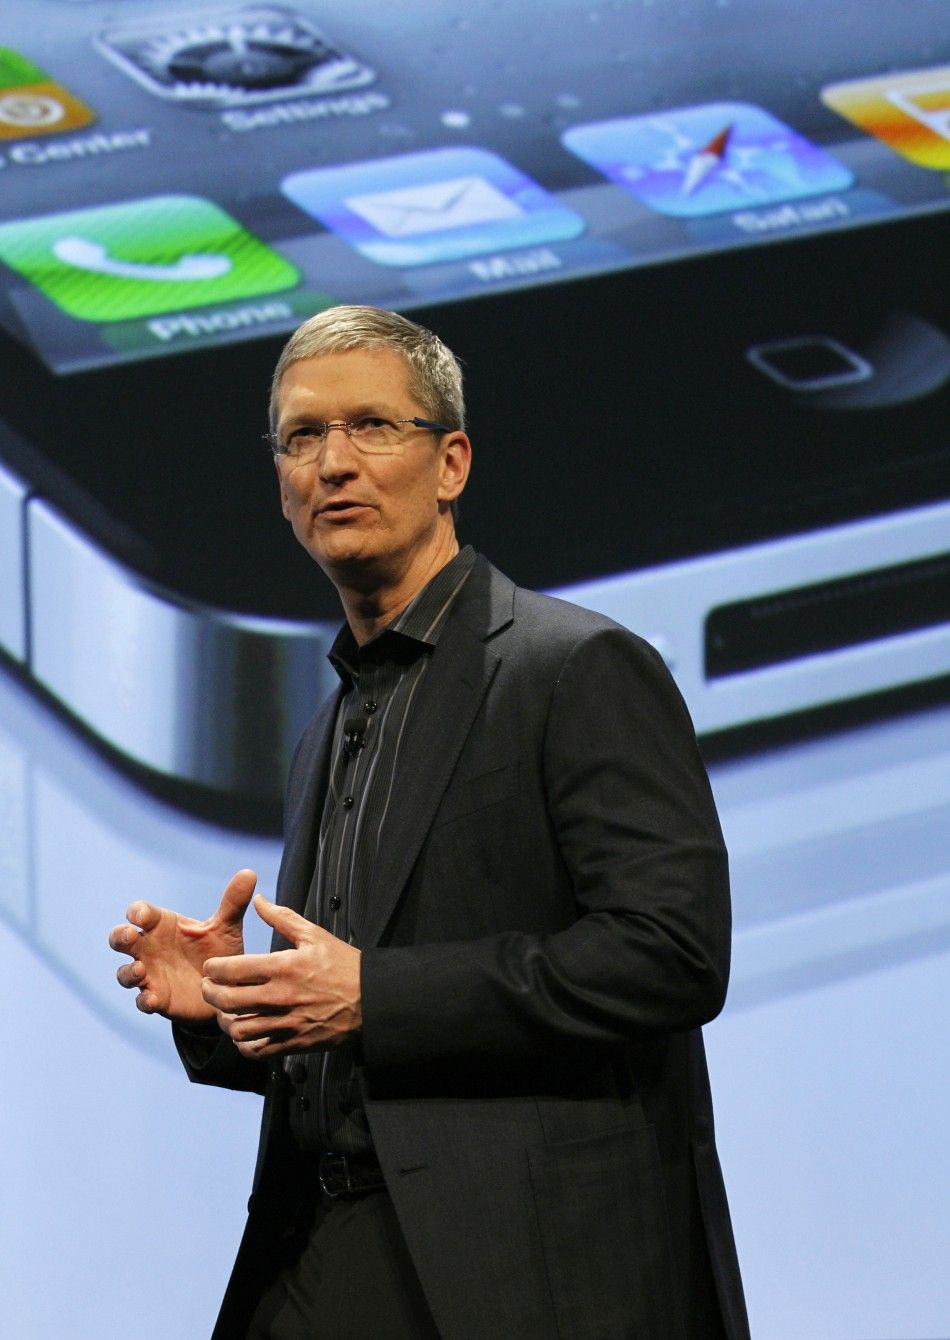 Tim Cook speaking during Verizons iPhone 4 launch event in New York